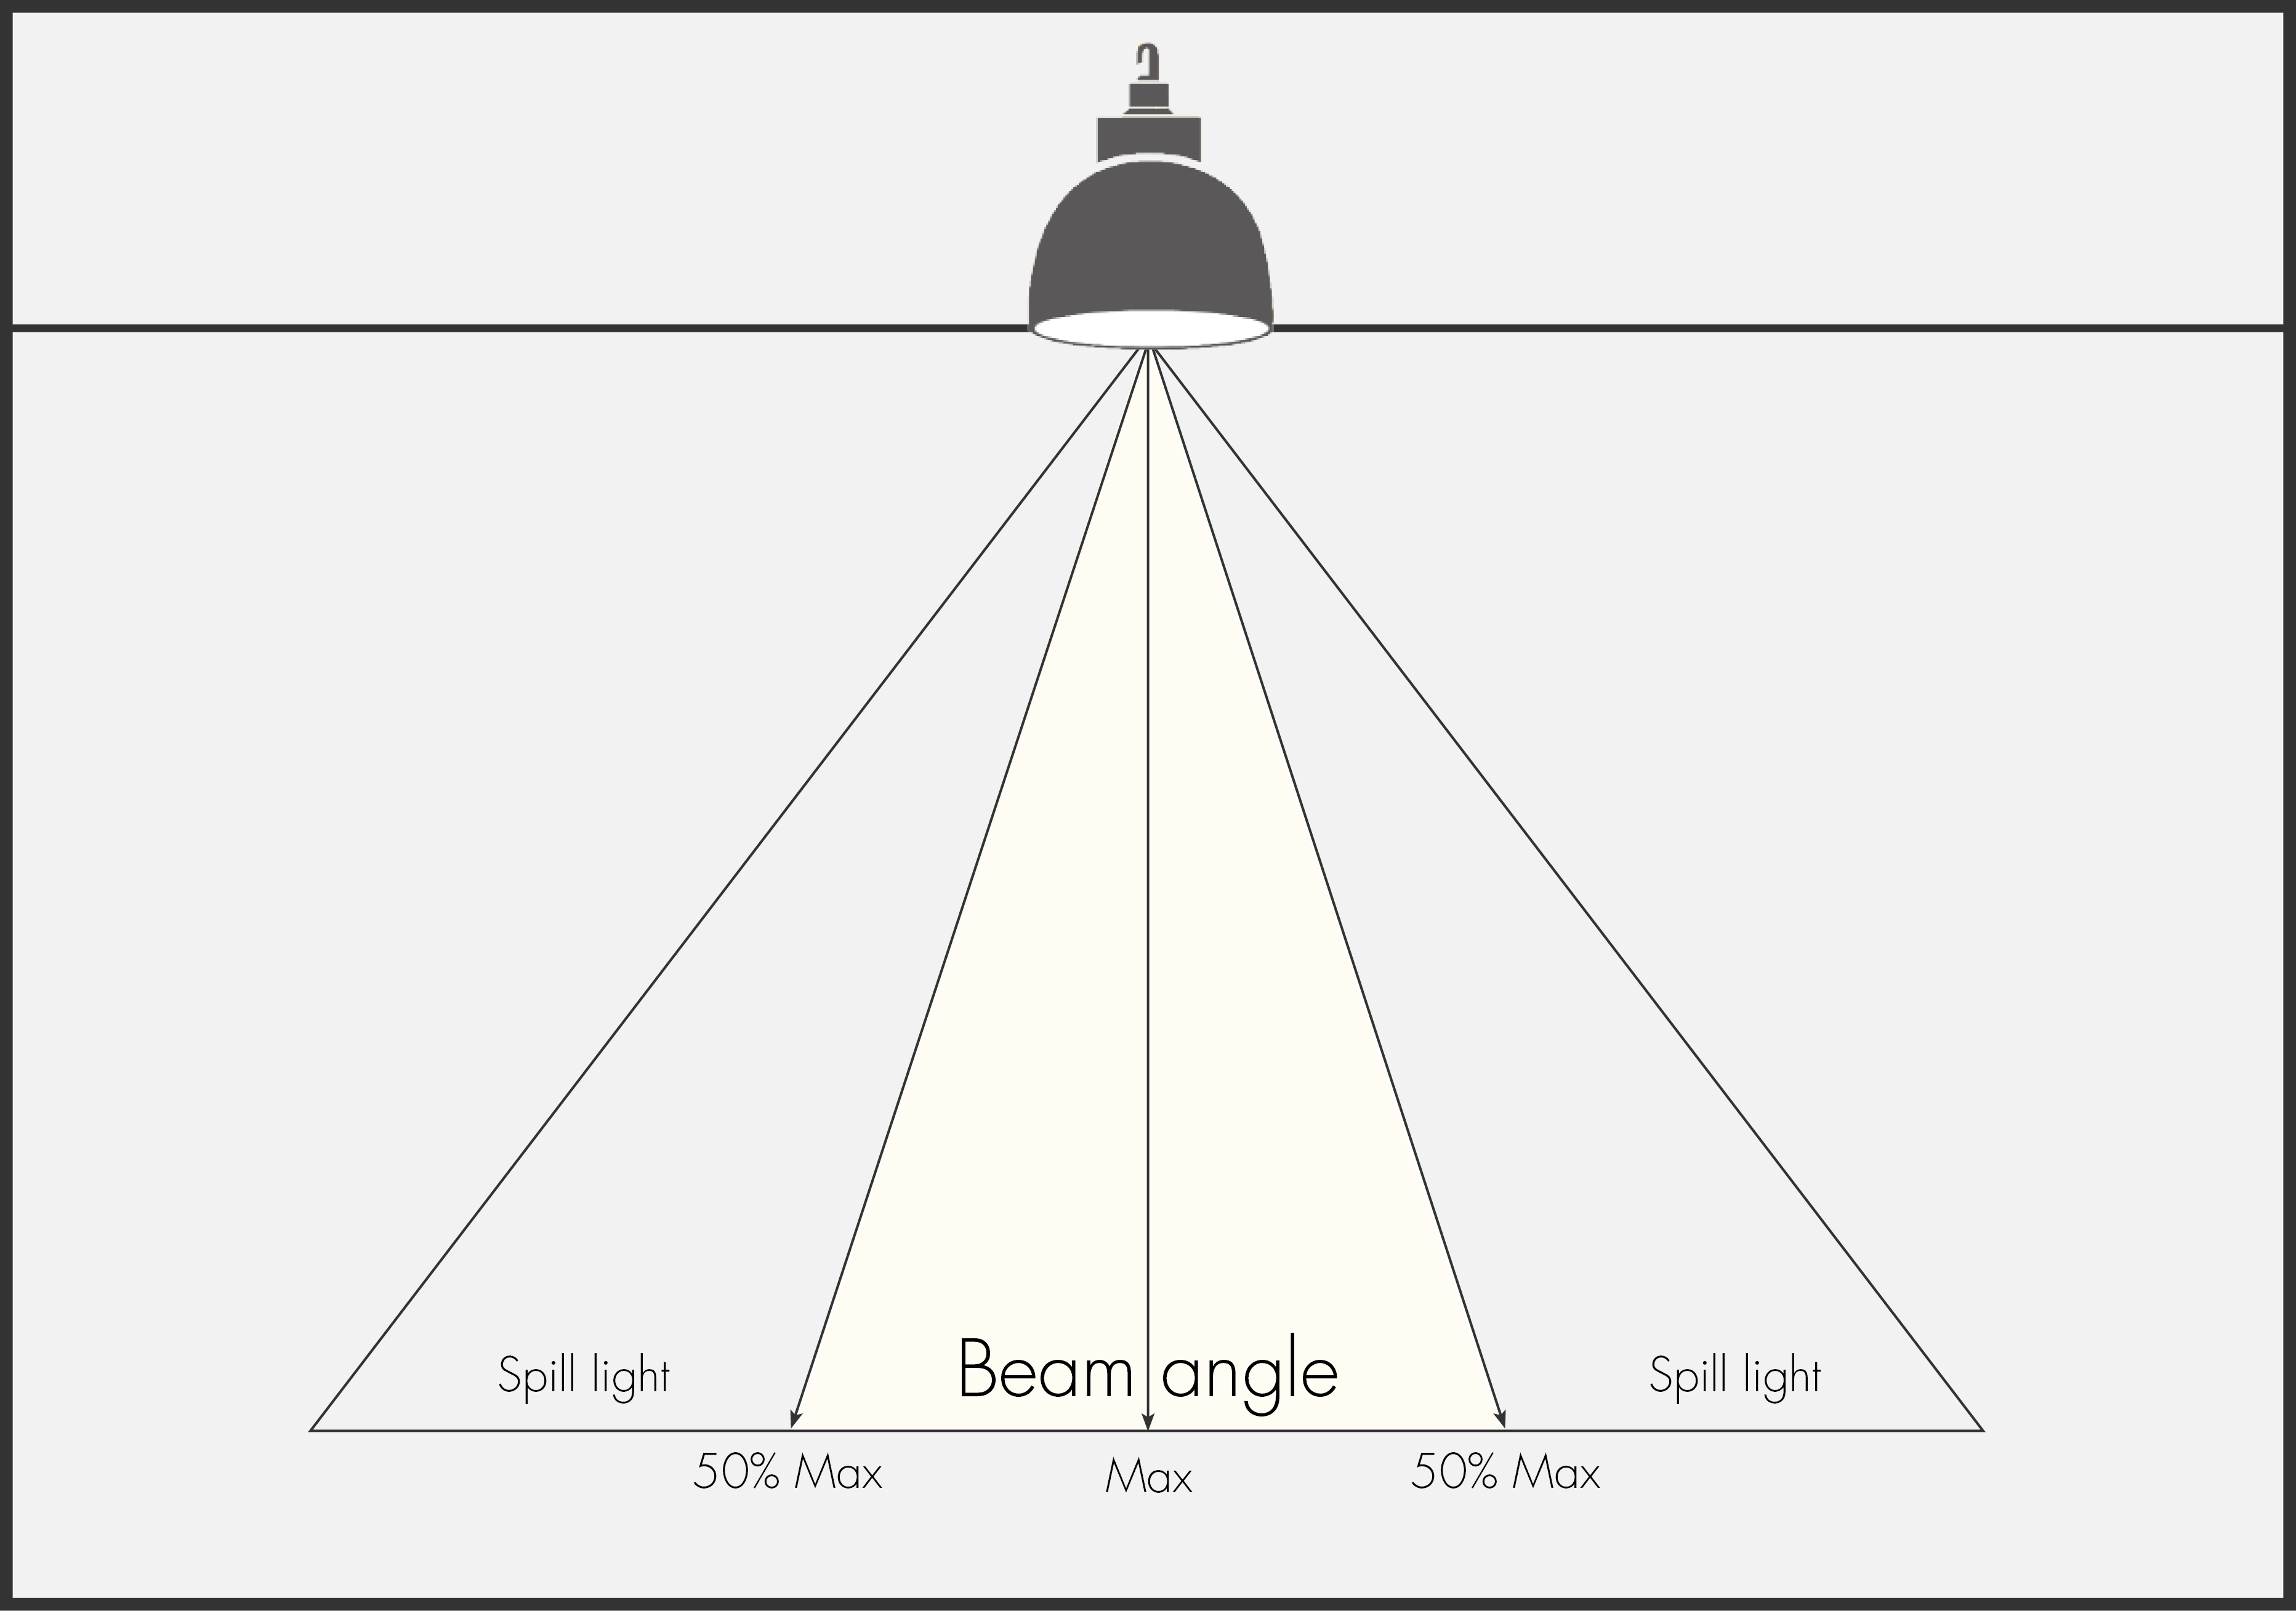 The importance of beam angles in lighting